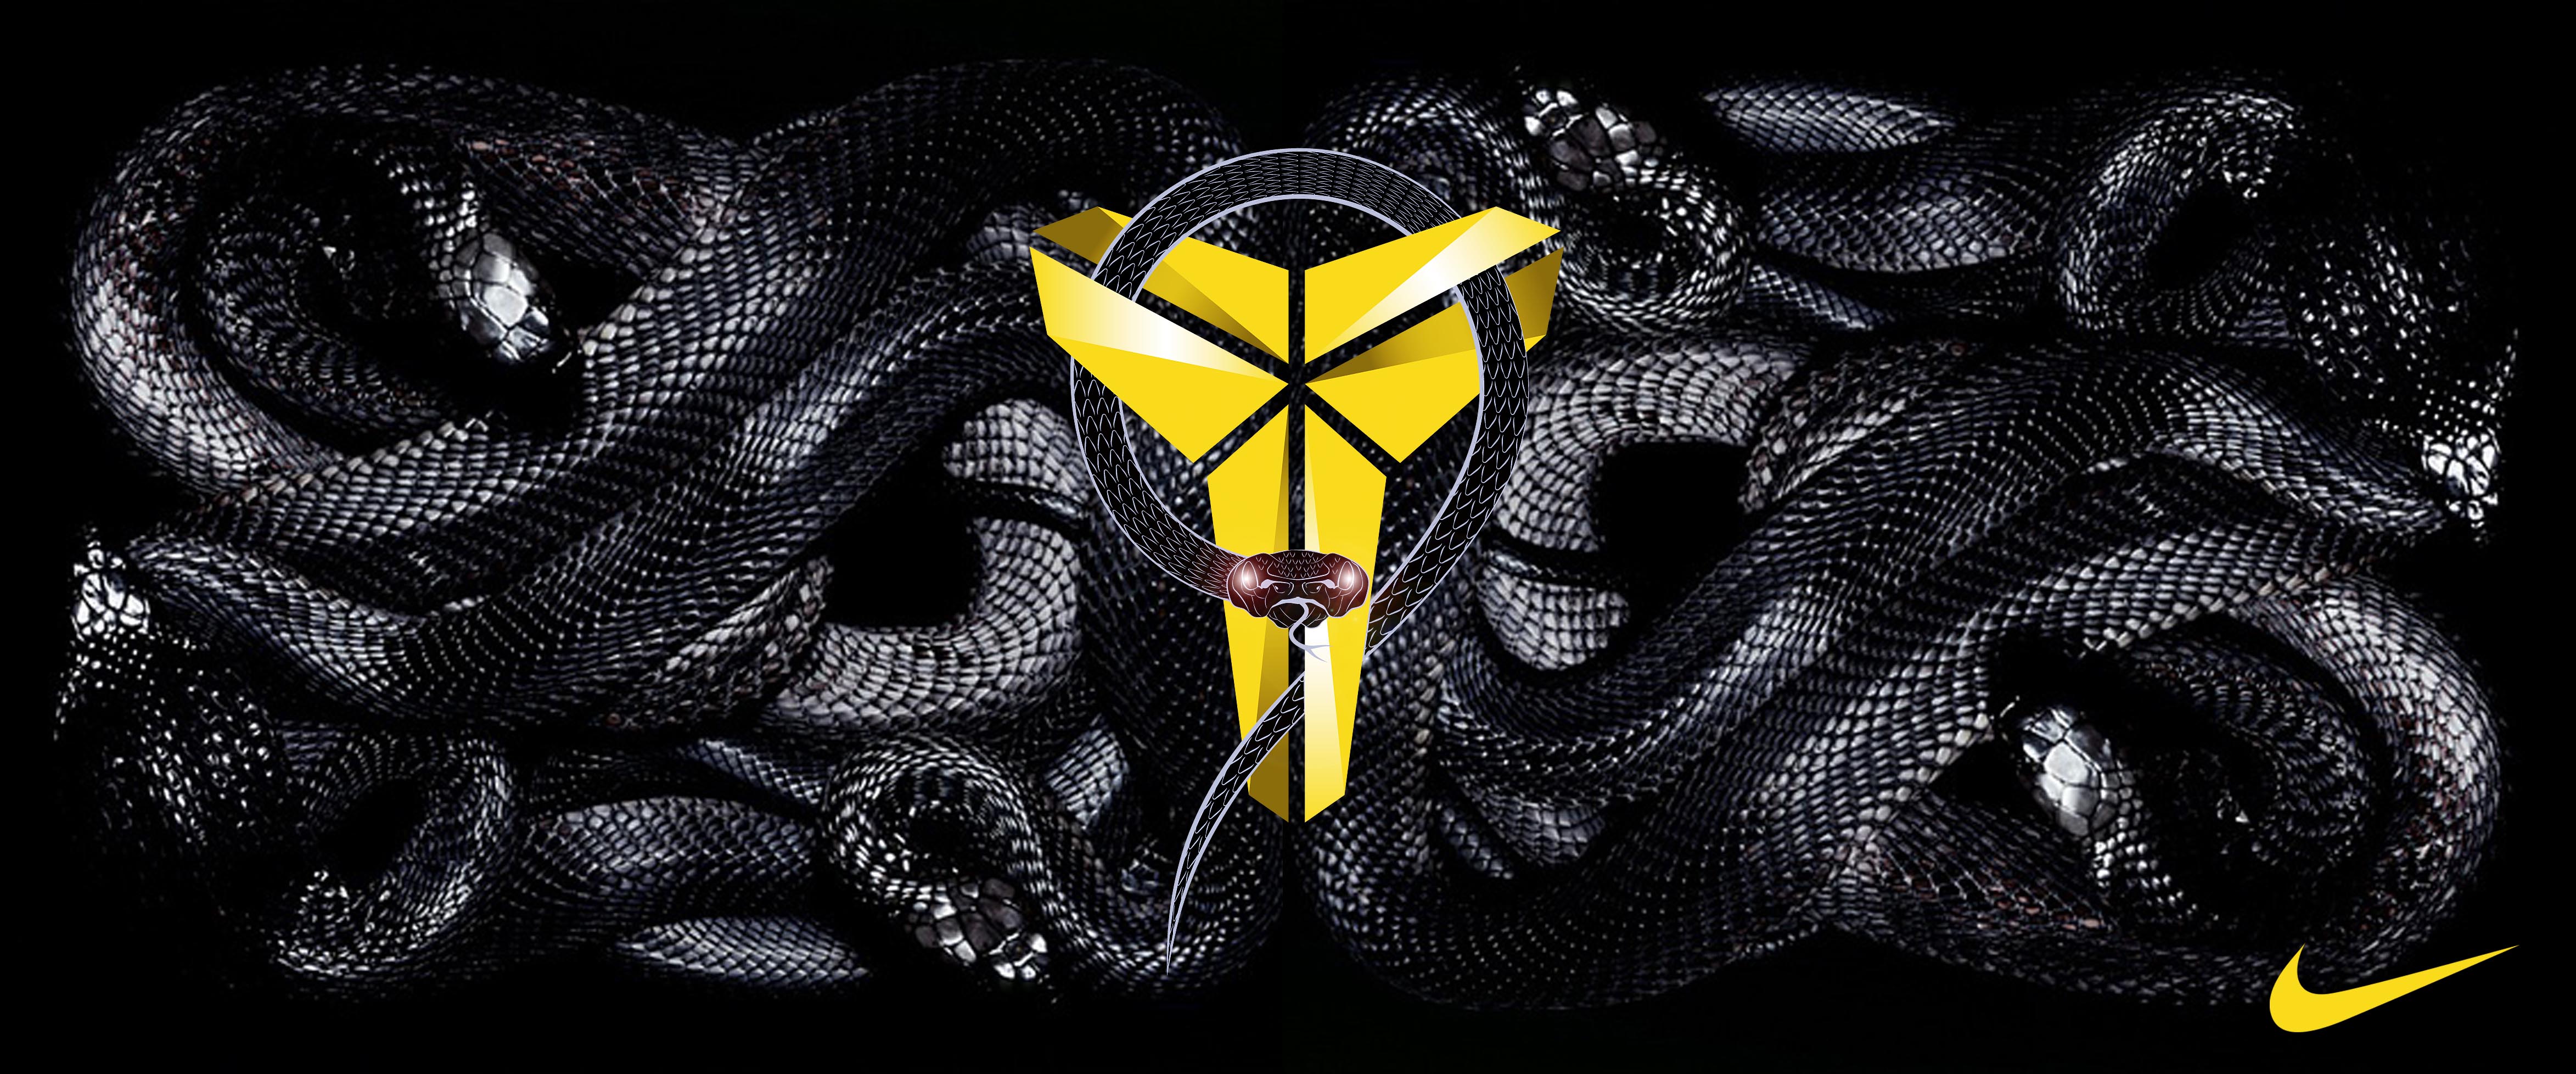 Attacking Business With Mamba Mentality